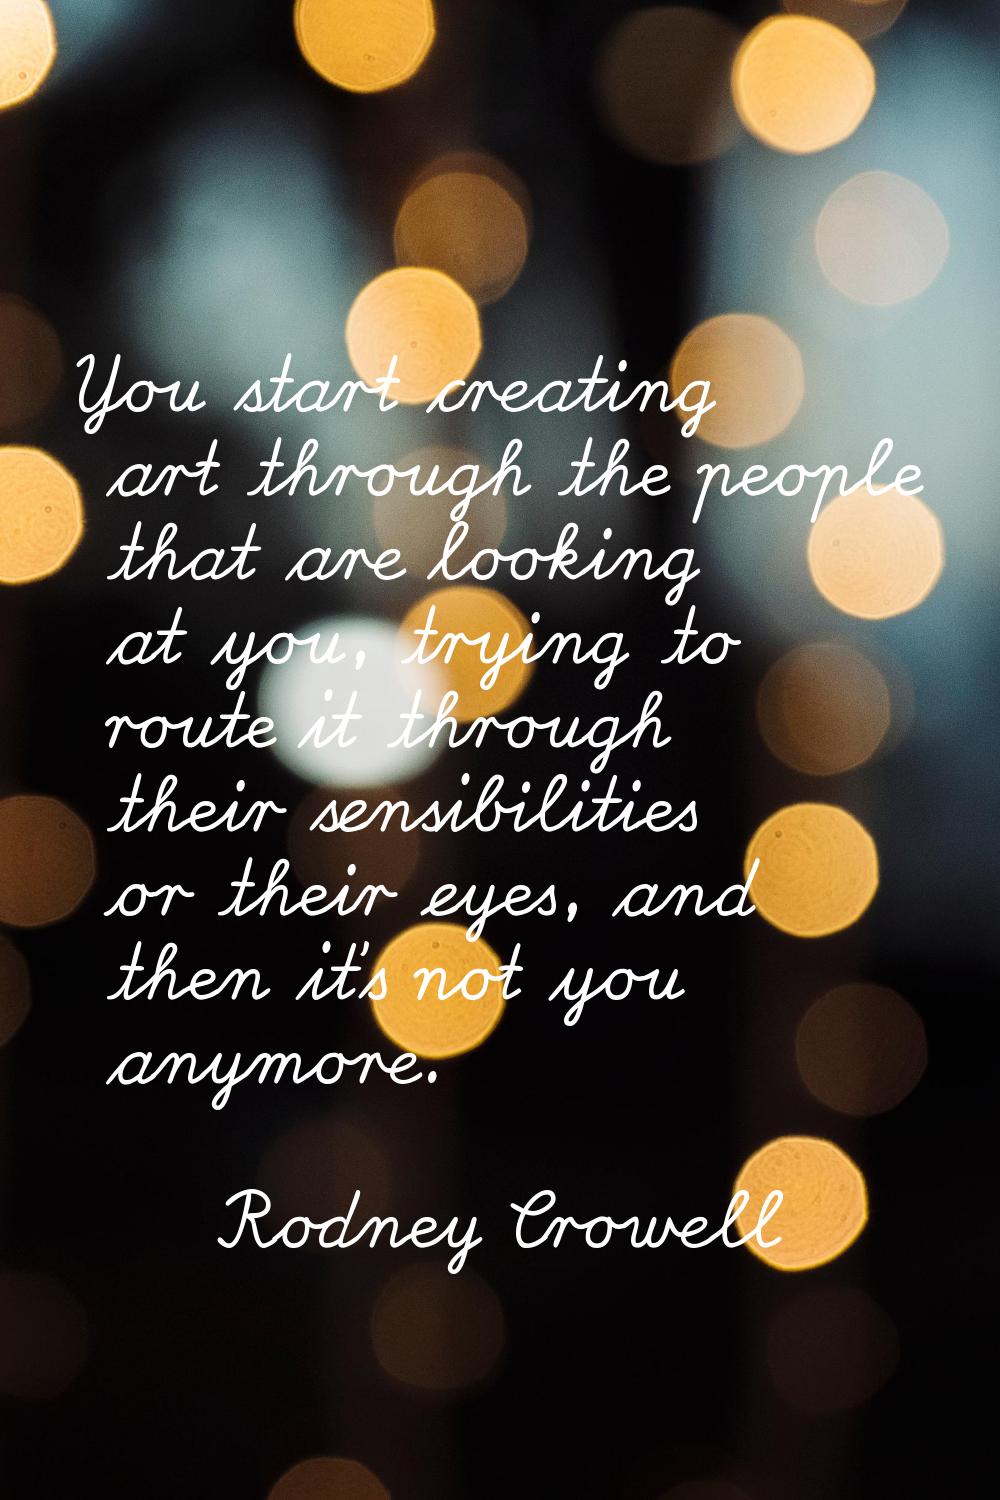 You start creating art through the people that are looking at you, trying to route it through their